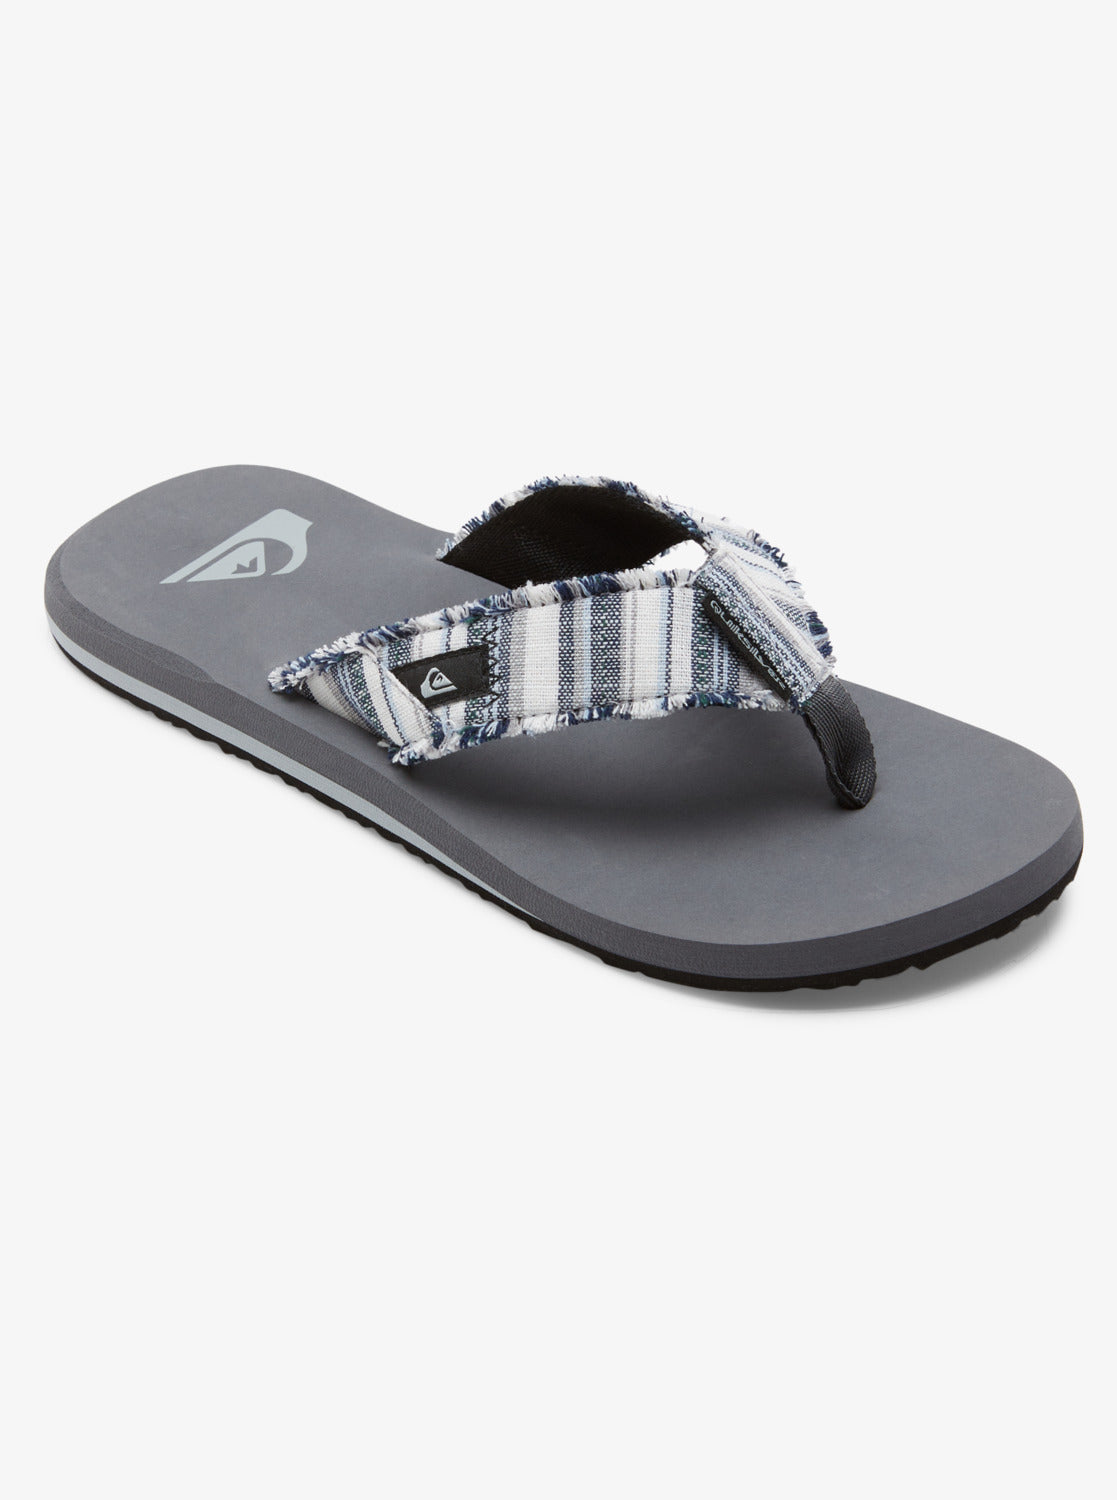 Quiksilver Monkey Abyss - Sandals for Men in Grey